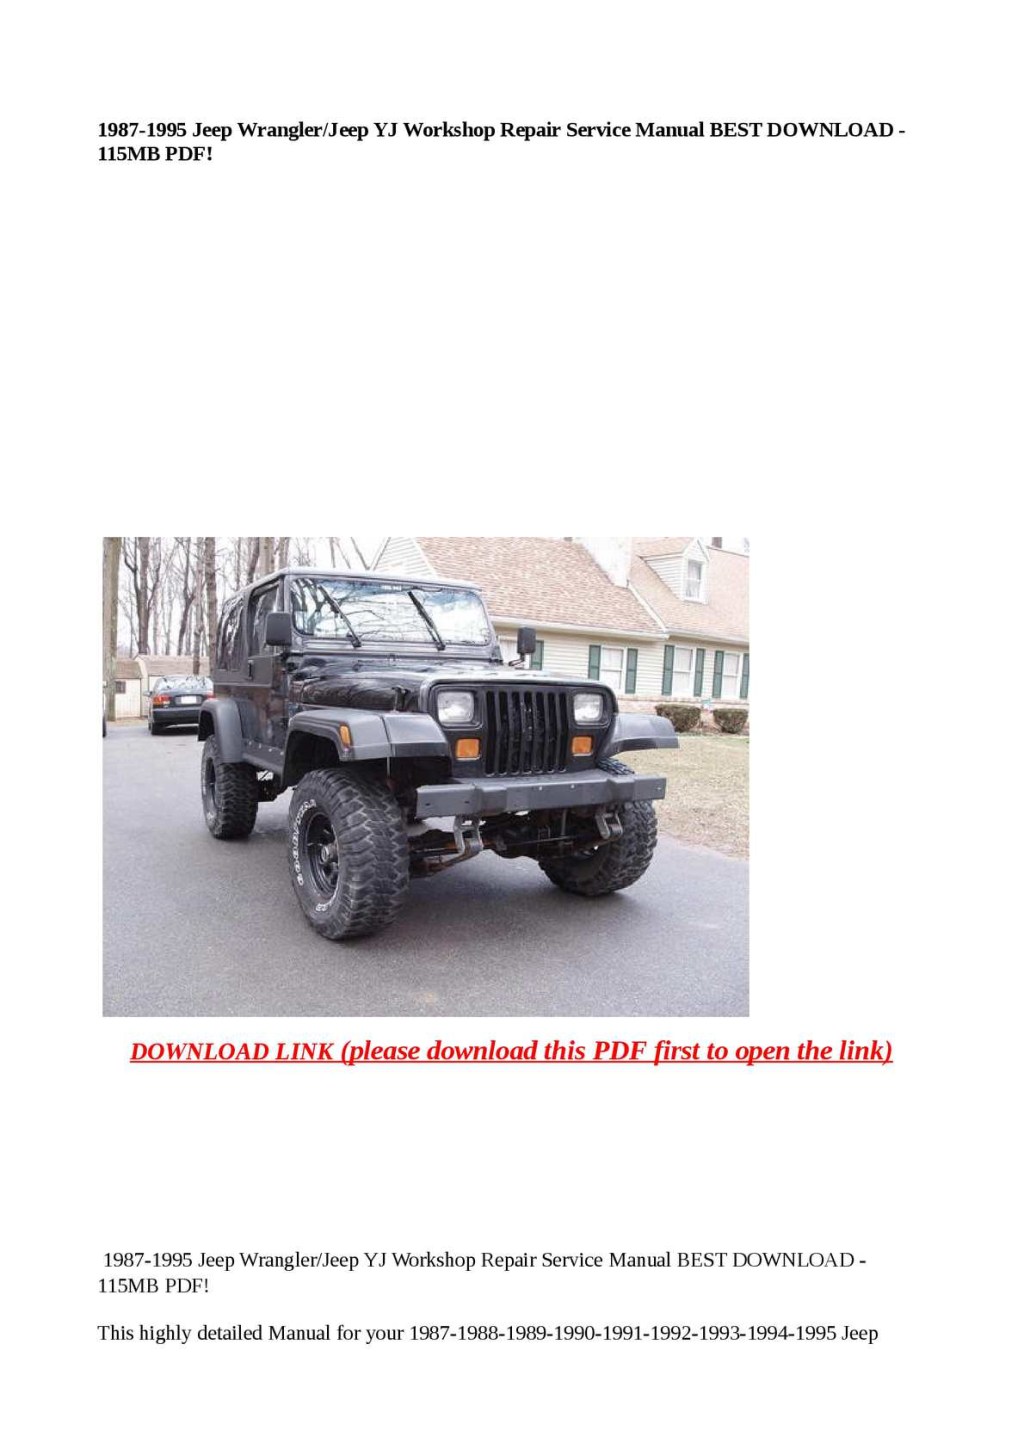 Picture of: – Jeep Wrangler/Jeep YJ Workshop Repair Service Manual